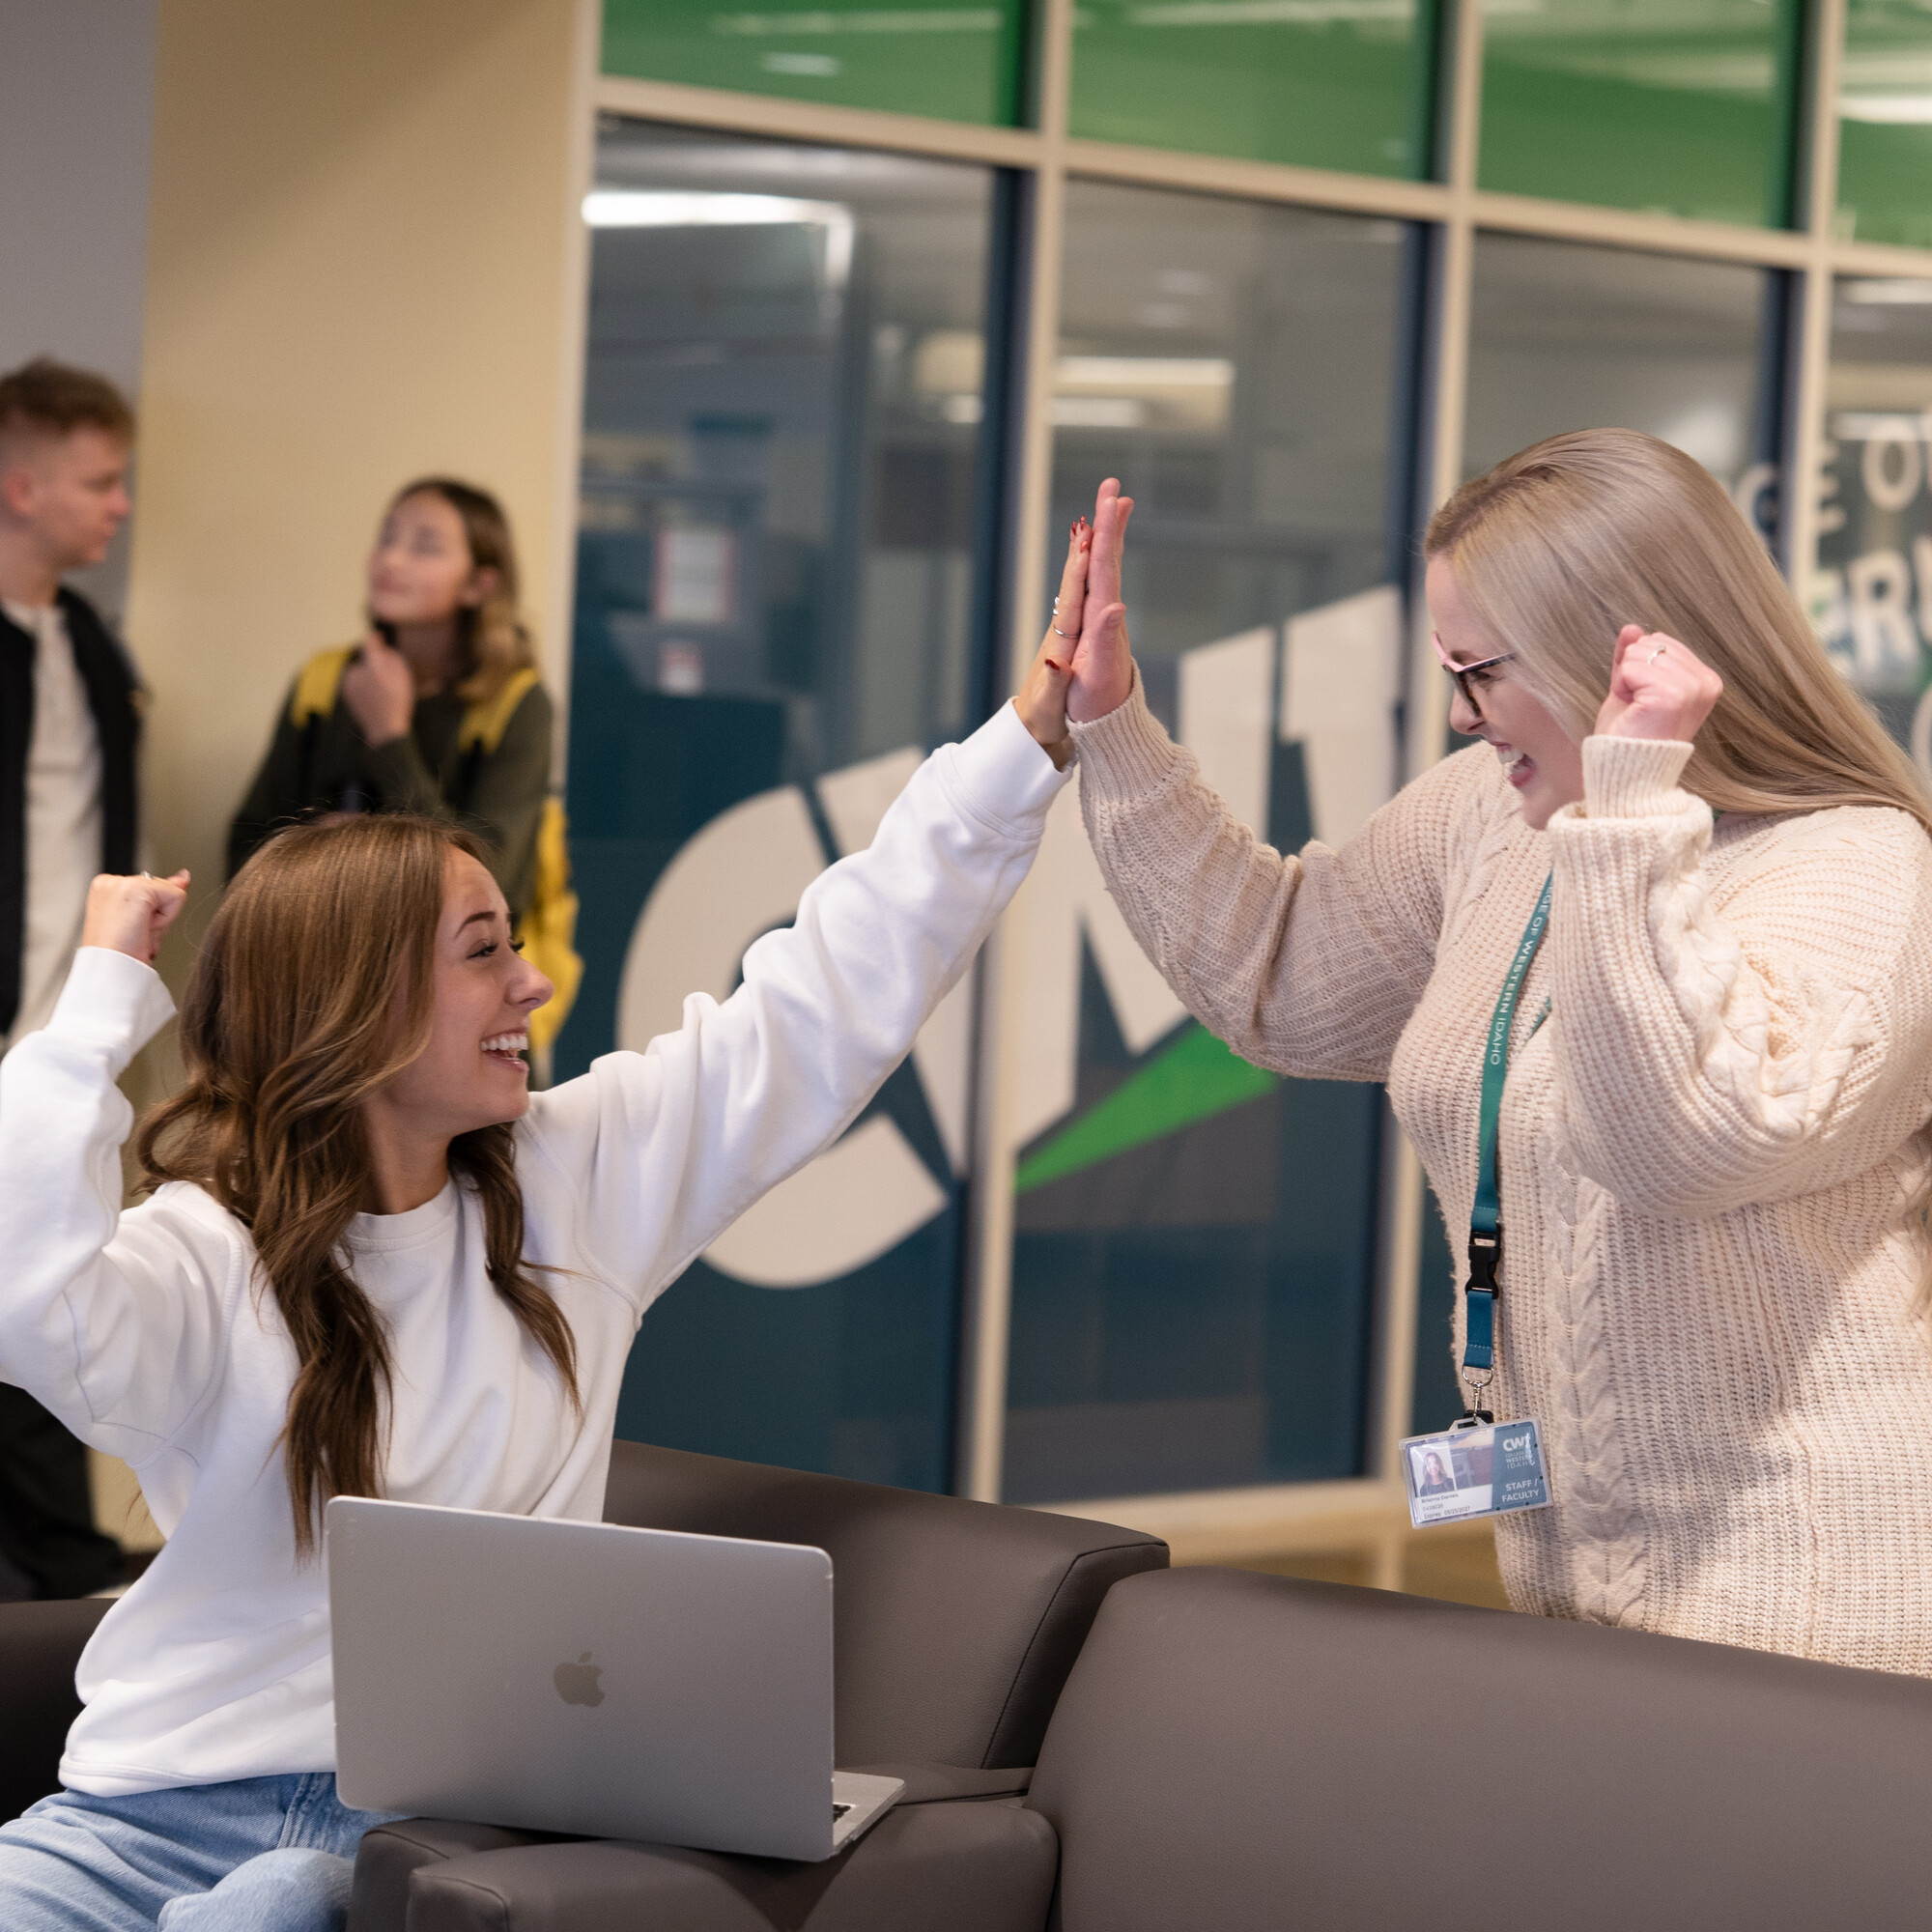 Two people high-fiving after submitting a FAFSA application